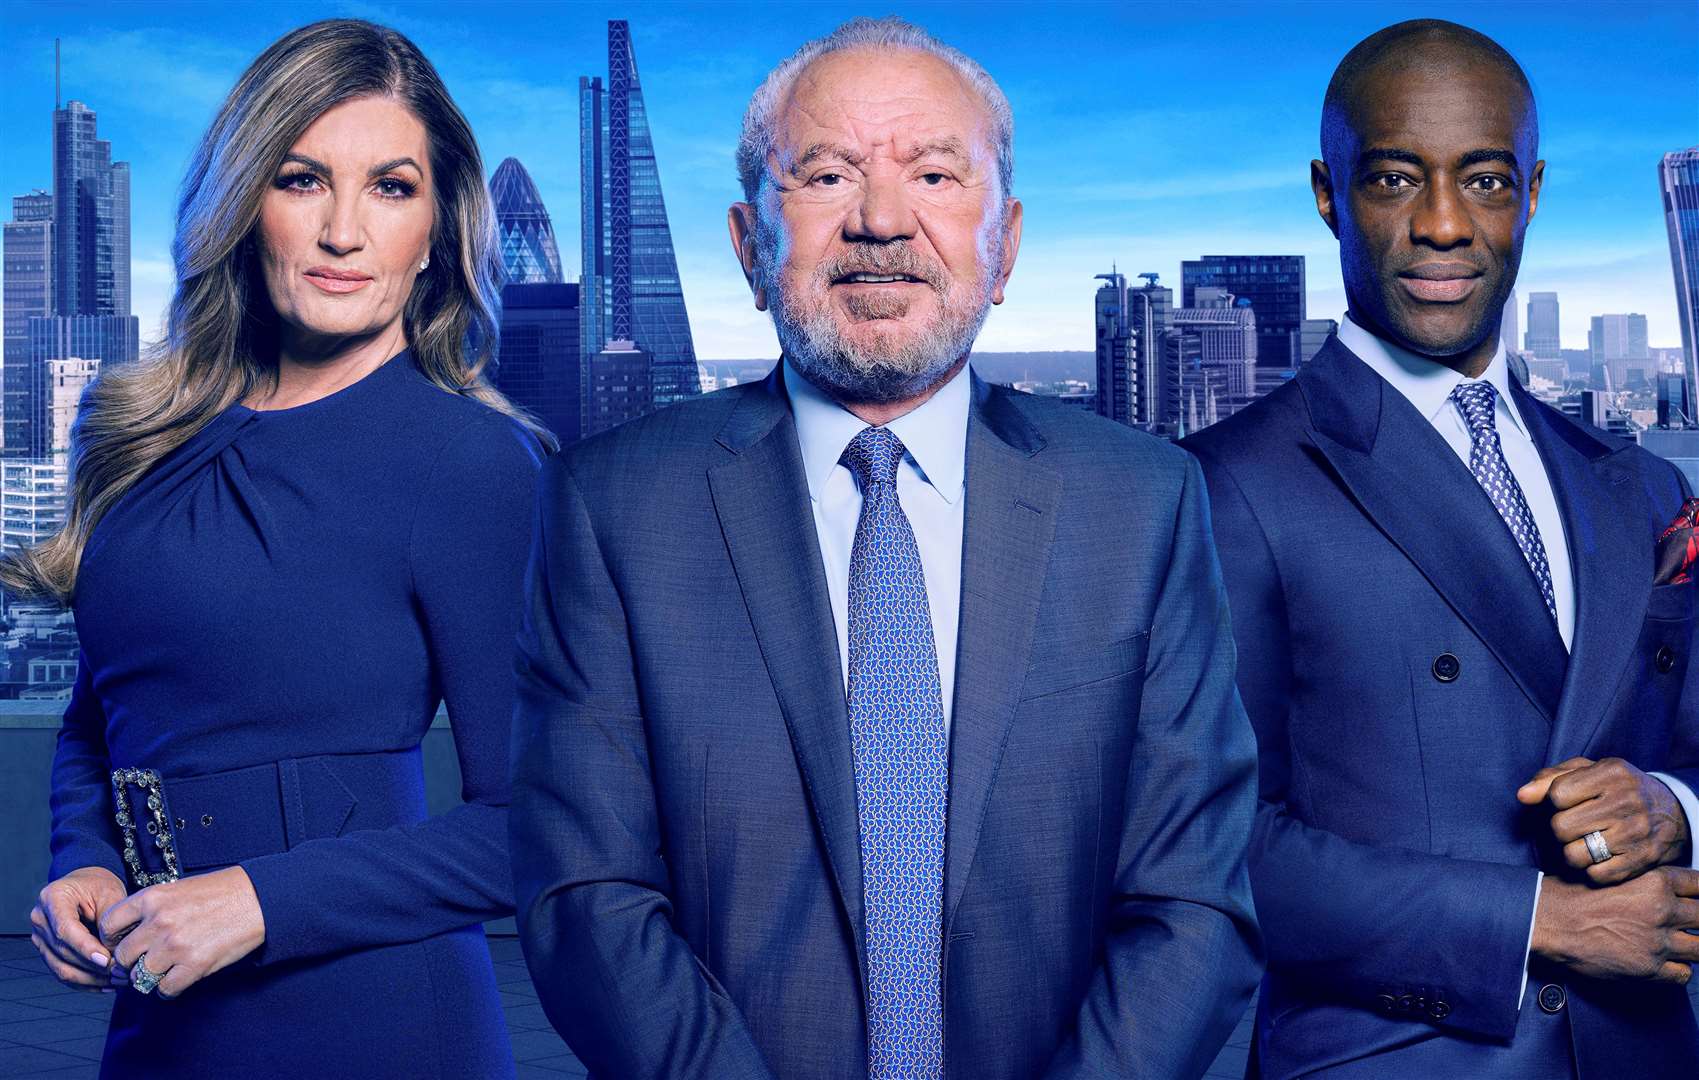 The Apprentice - has time come for it to retire gracefully? Picture: BBC